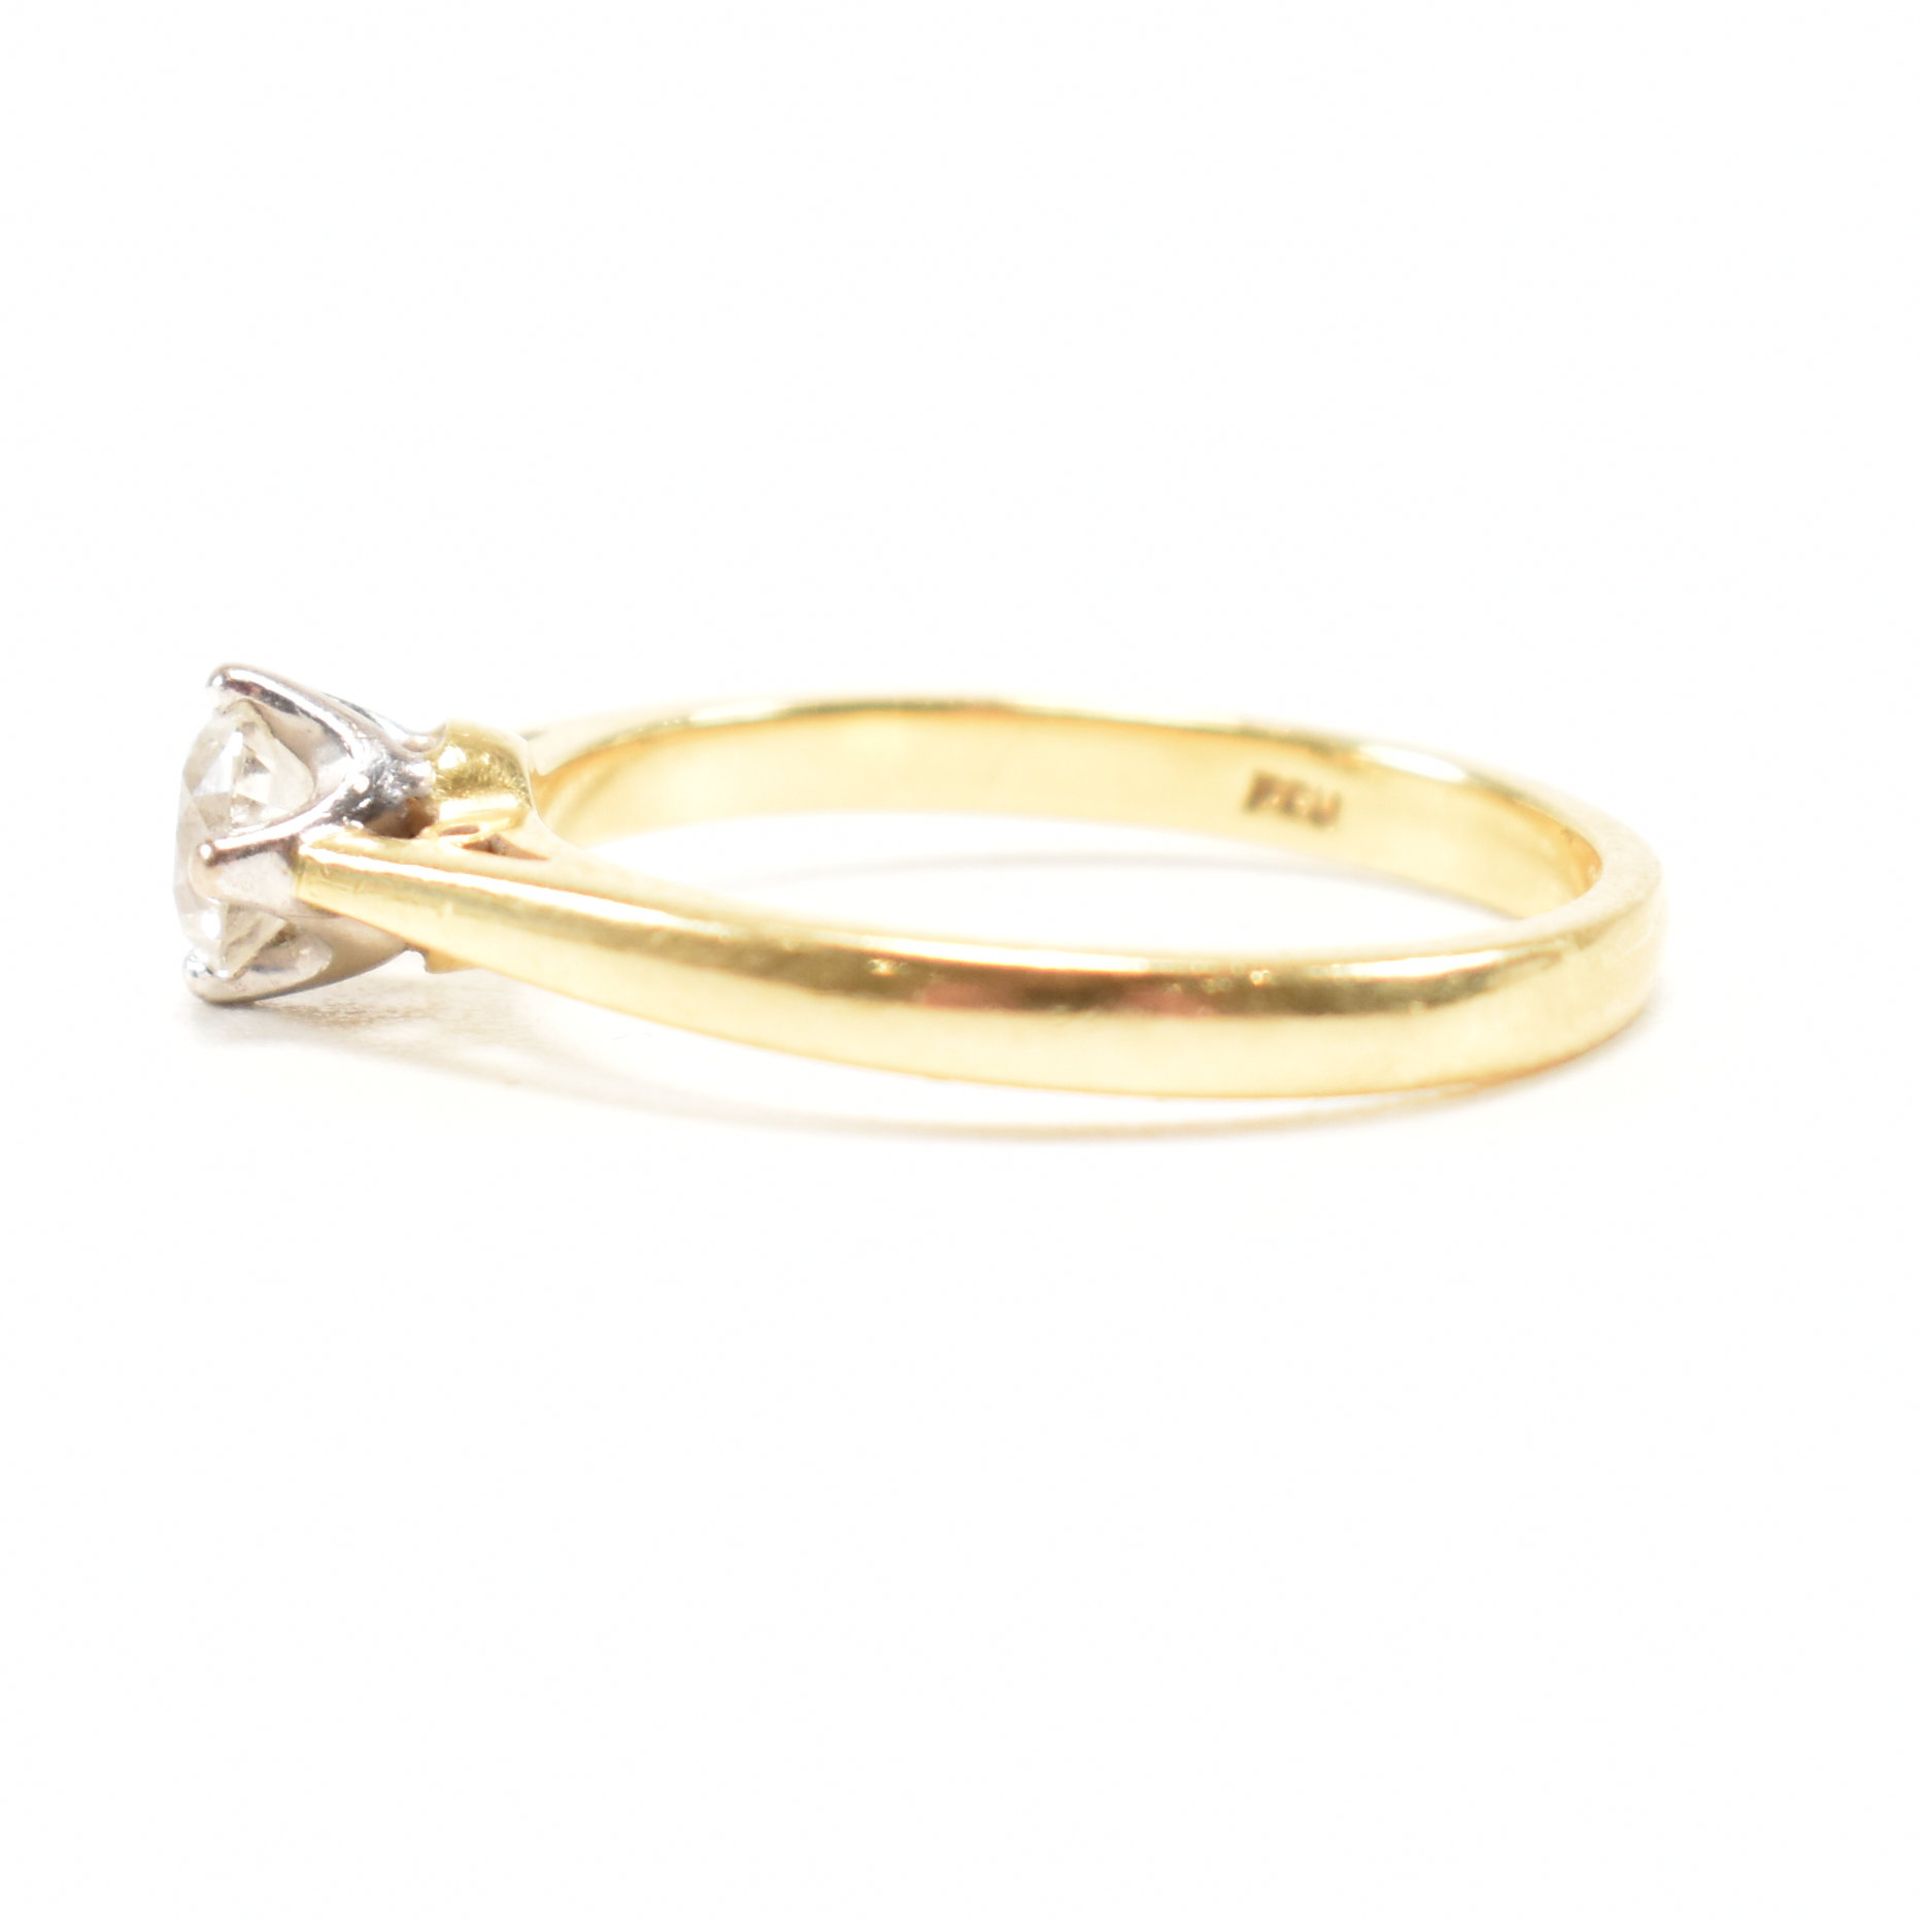 HALLMARKED 9CT GOLD & DIAMOND SOLITAIRE RING - Image 3 of 8